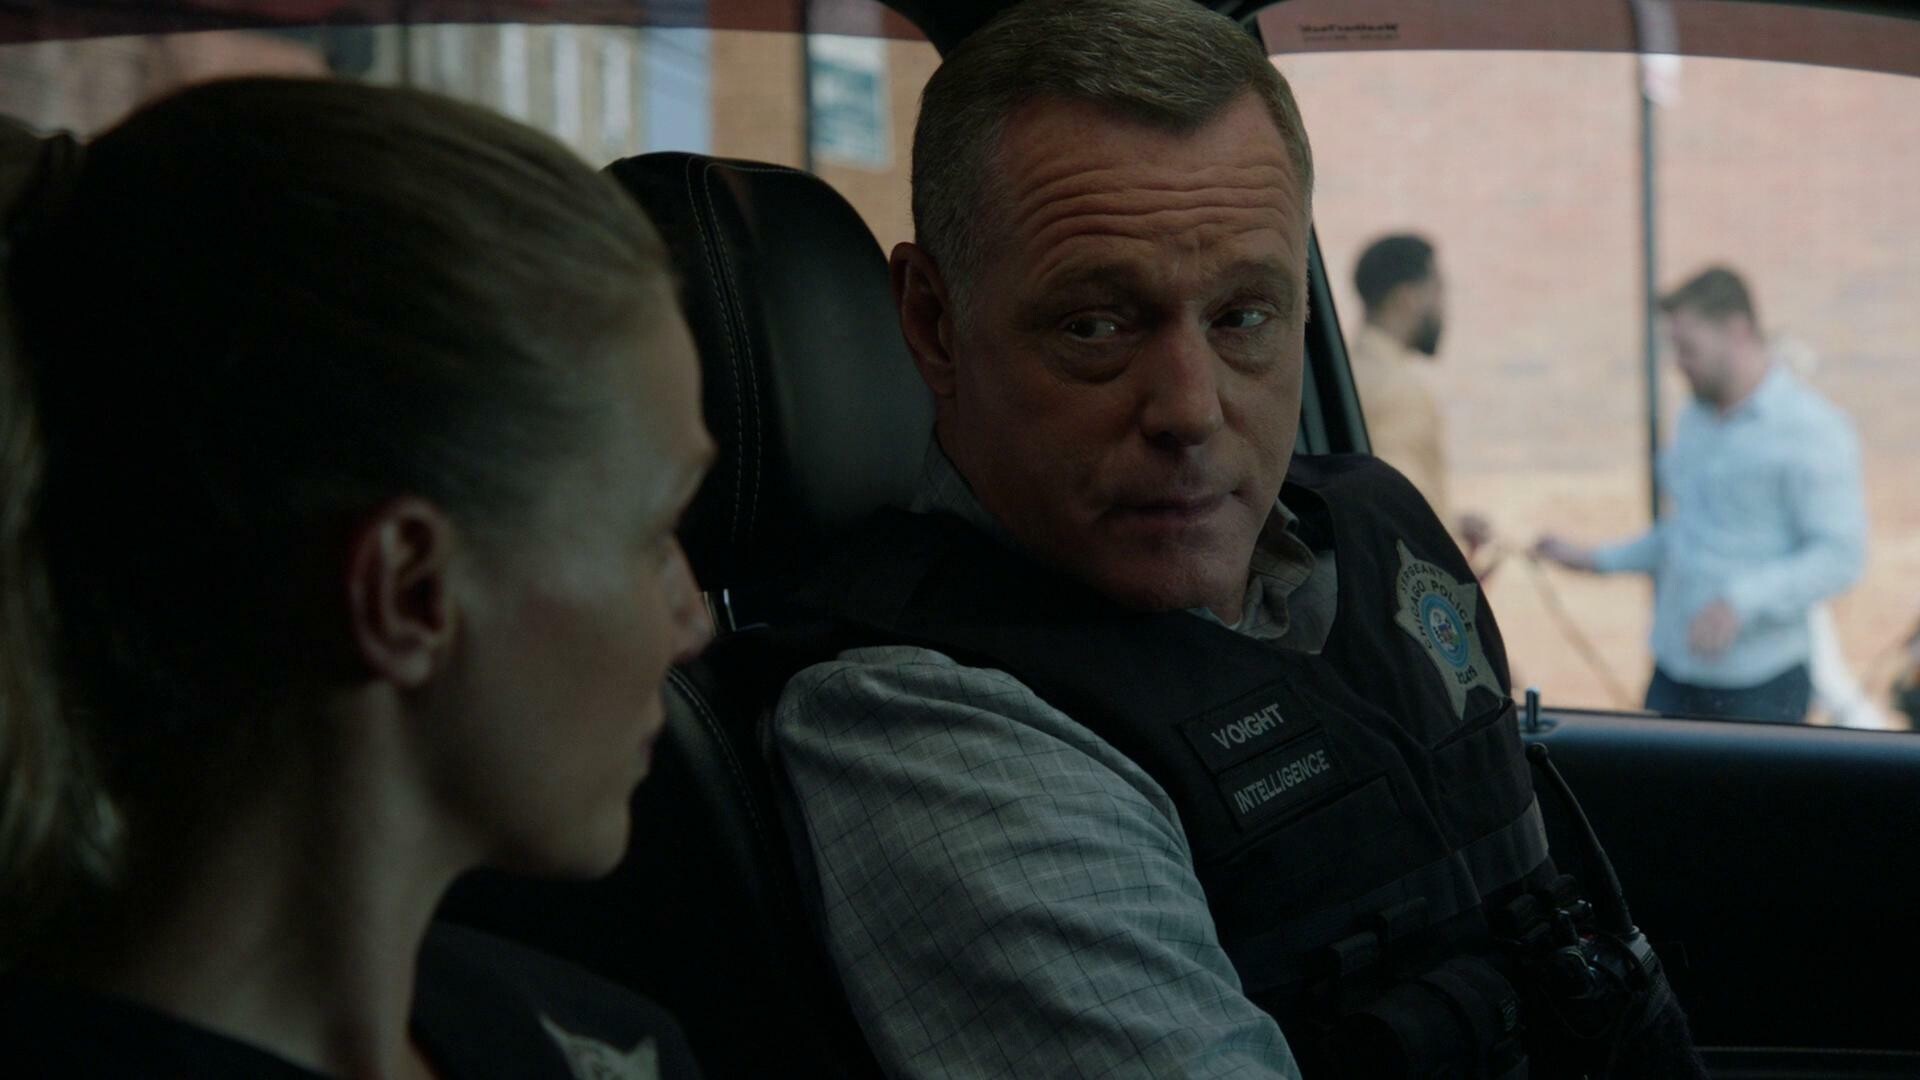 Chicago P.D. (TV Series): Season 9 Episode 3, The One Next To Me, Voight And Lindsay, Season 9 Episode 3,. 1920x1080 Full HD Wallpaper.